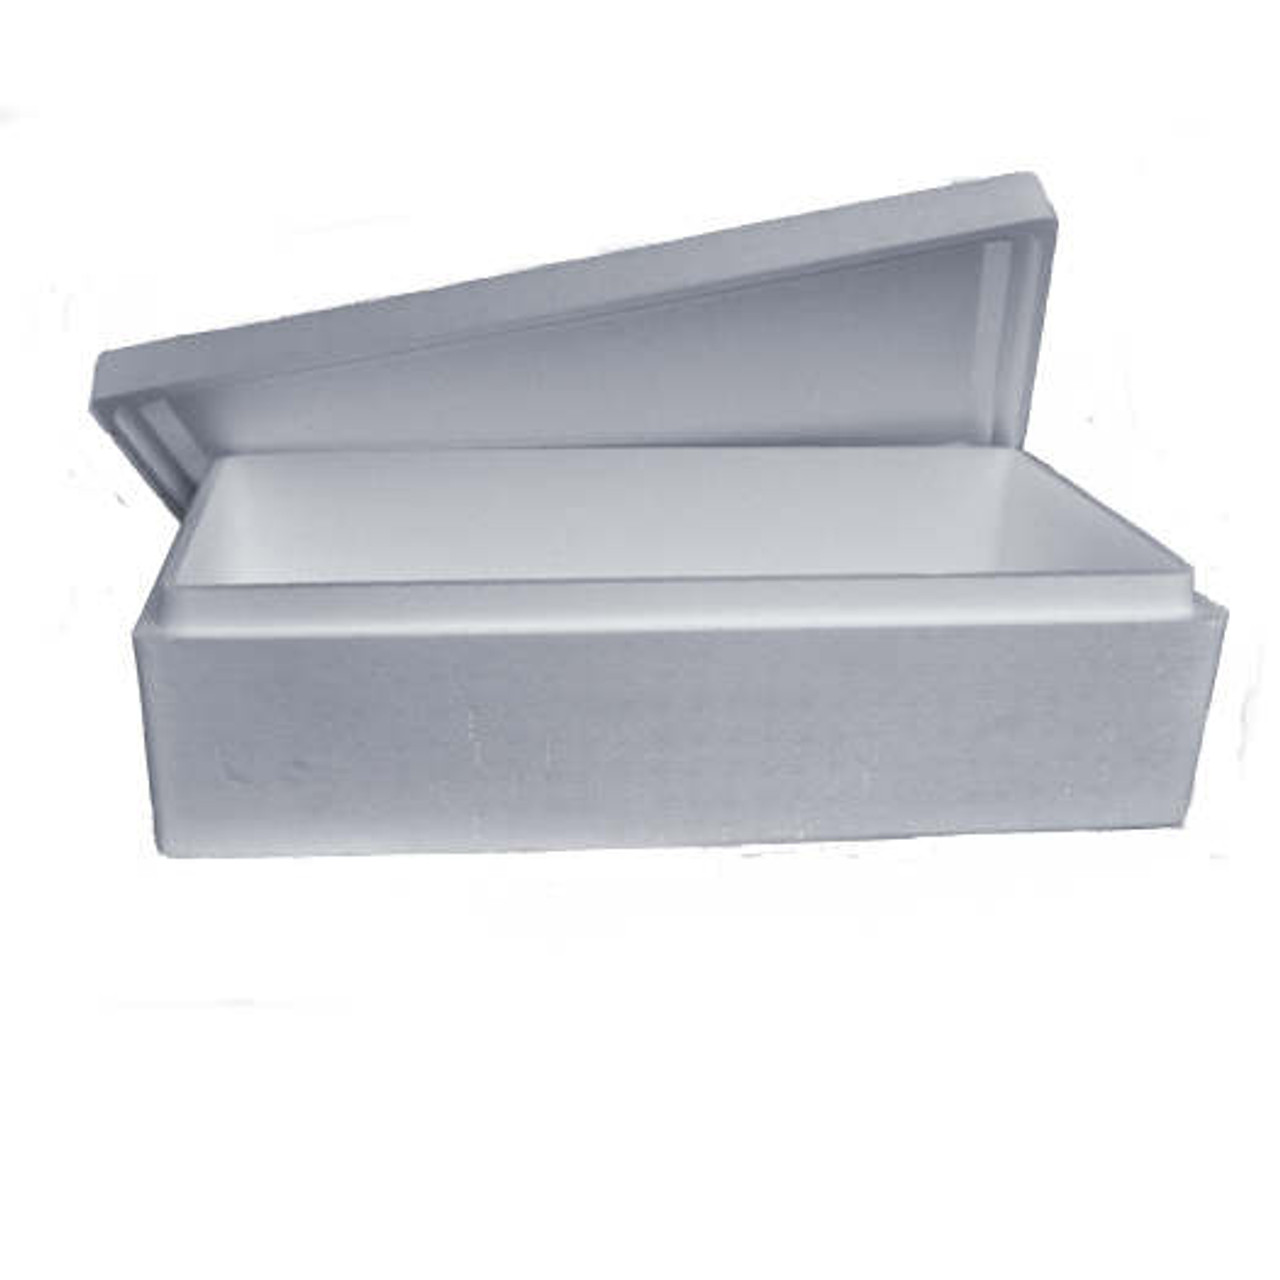 25klo LARGE Polystyrene Box and Lid  Sample